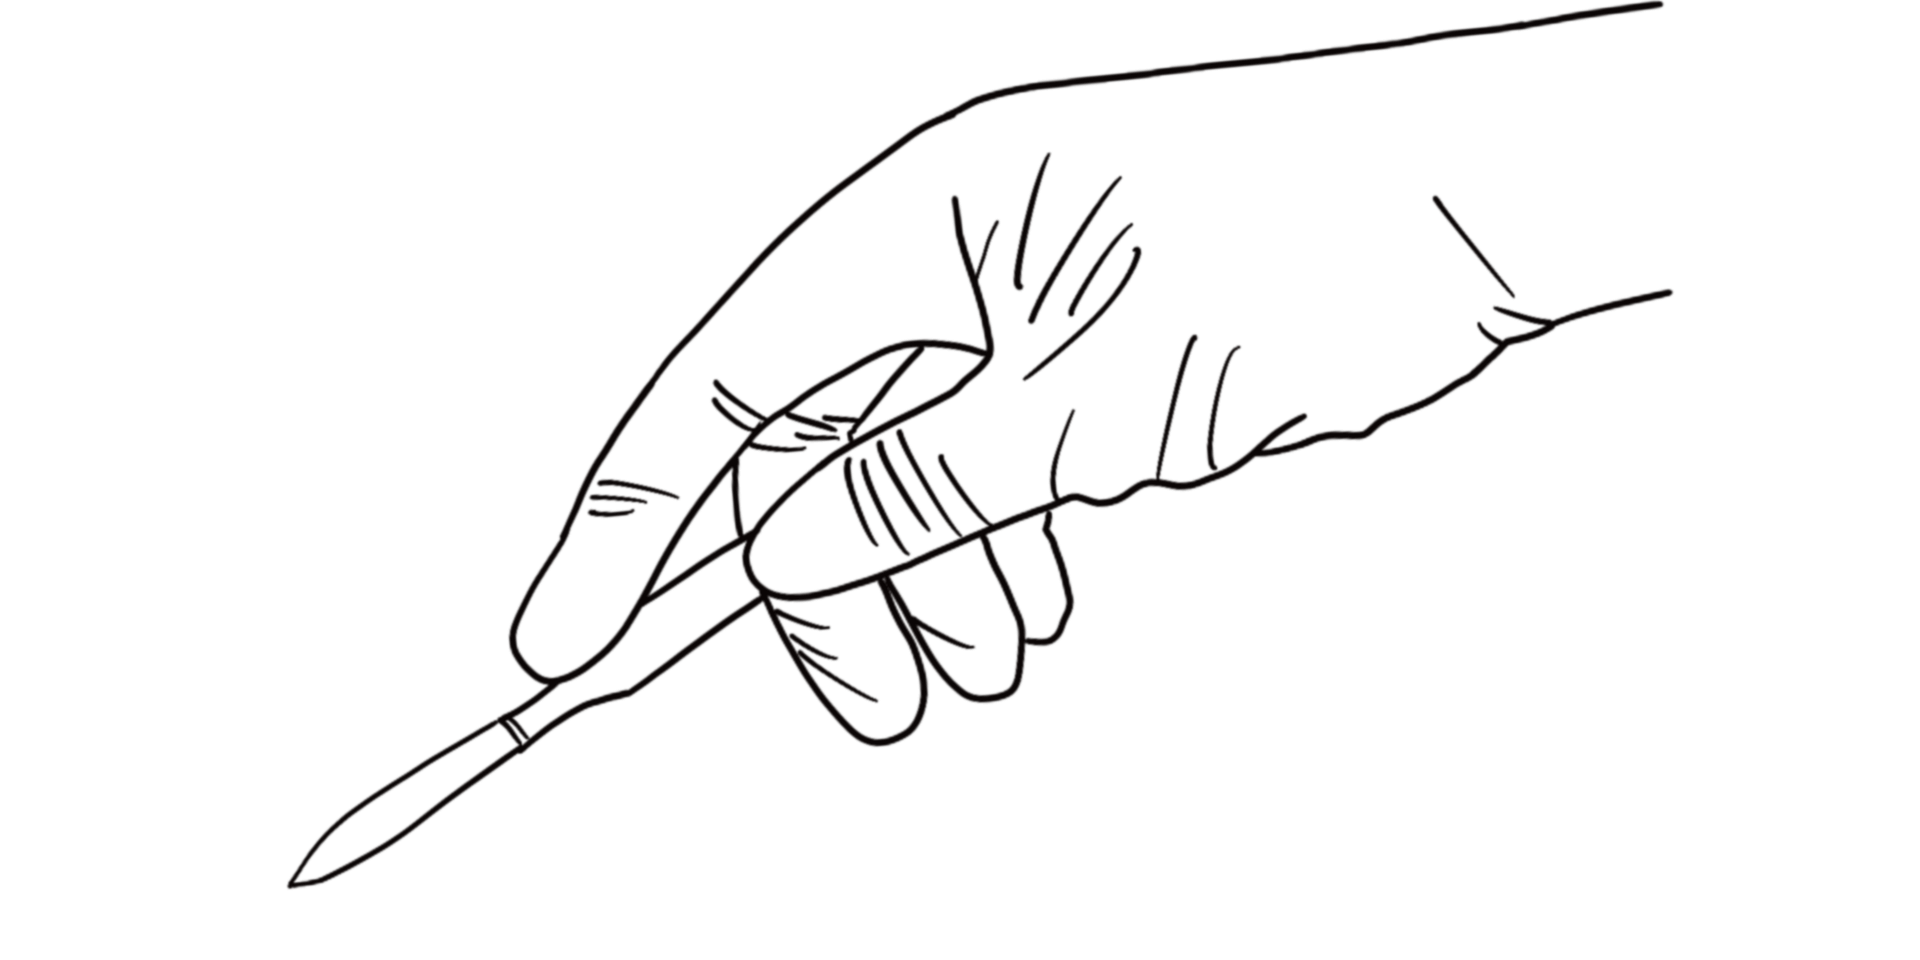 Illustration of a hand holding a scalpel